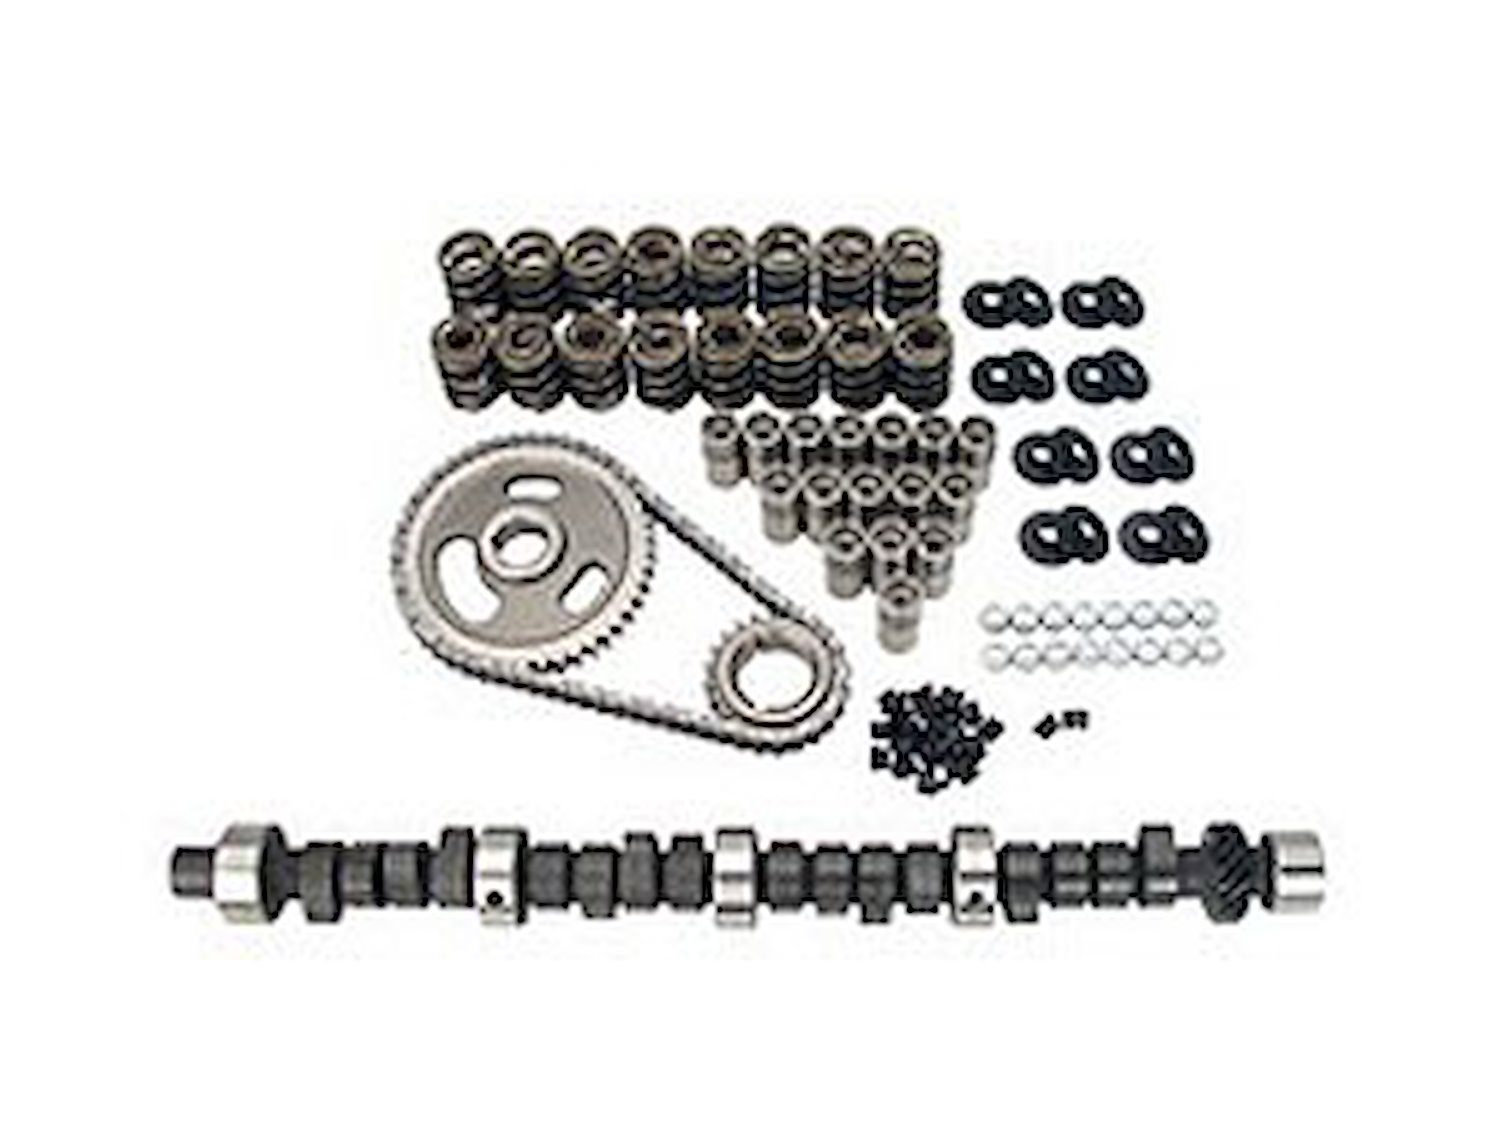 Xtreme Energy 250H Hydraulic Flat Tappet Camshaft Complete Kit Lift .432"/.444" Duration 250°/260° RPM Range 800-4800